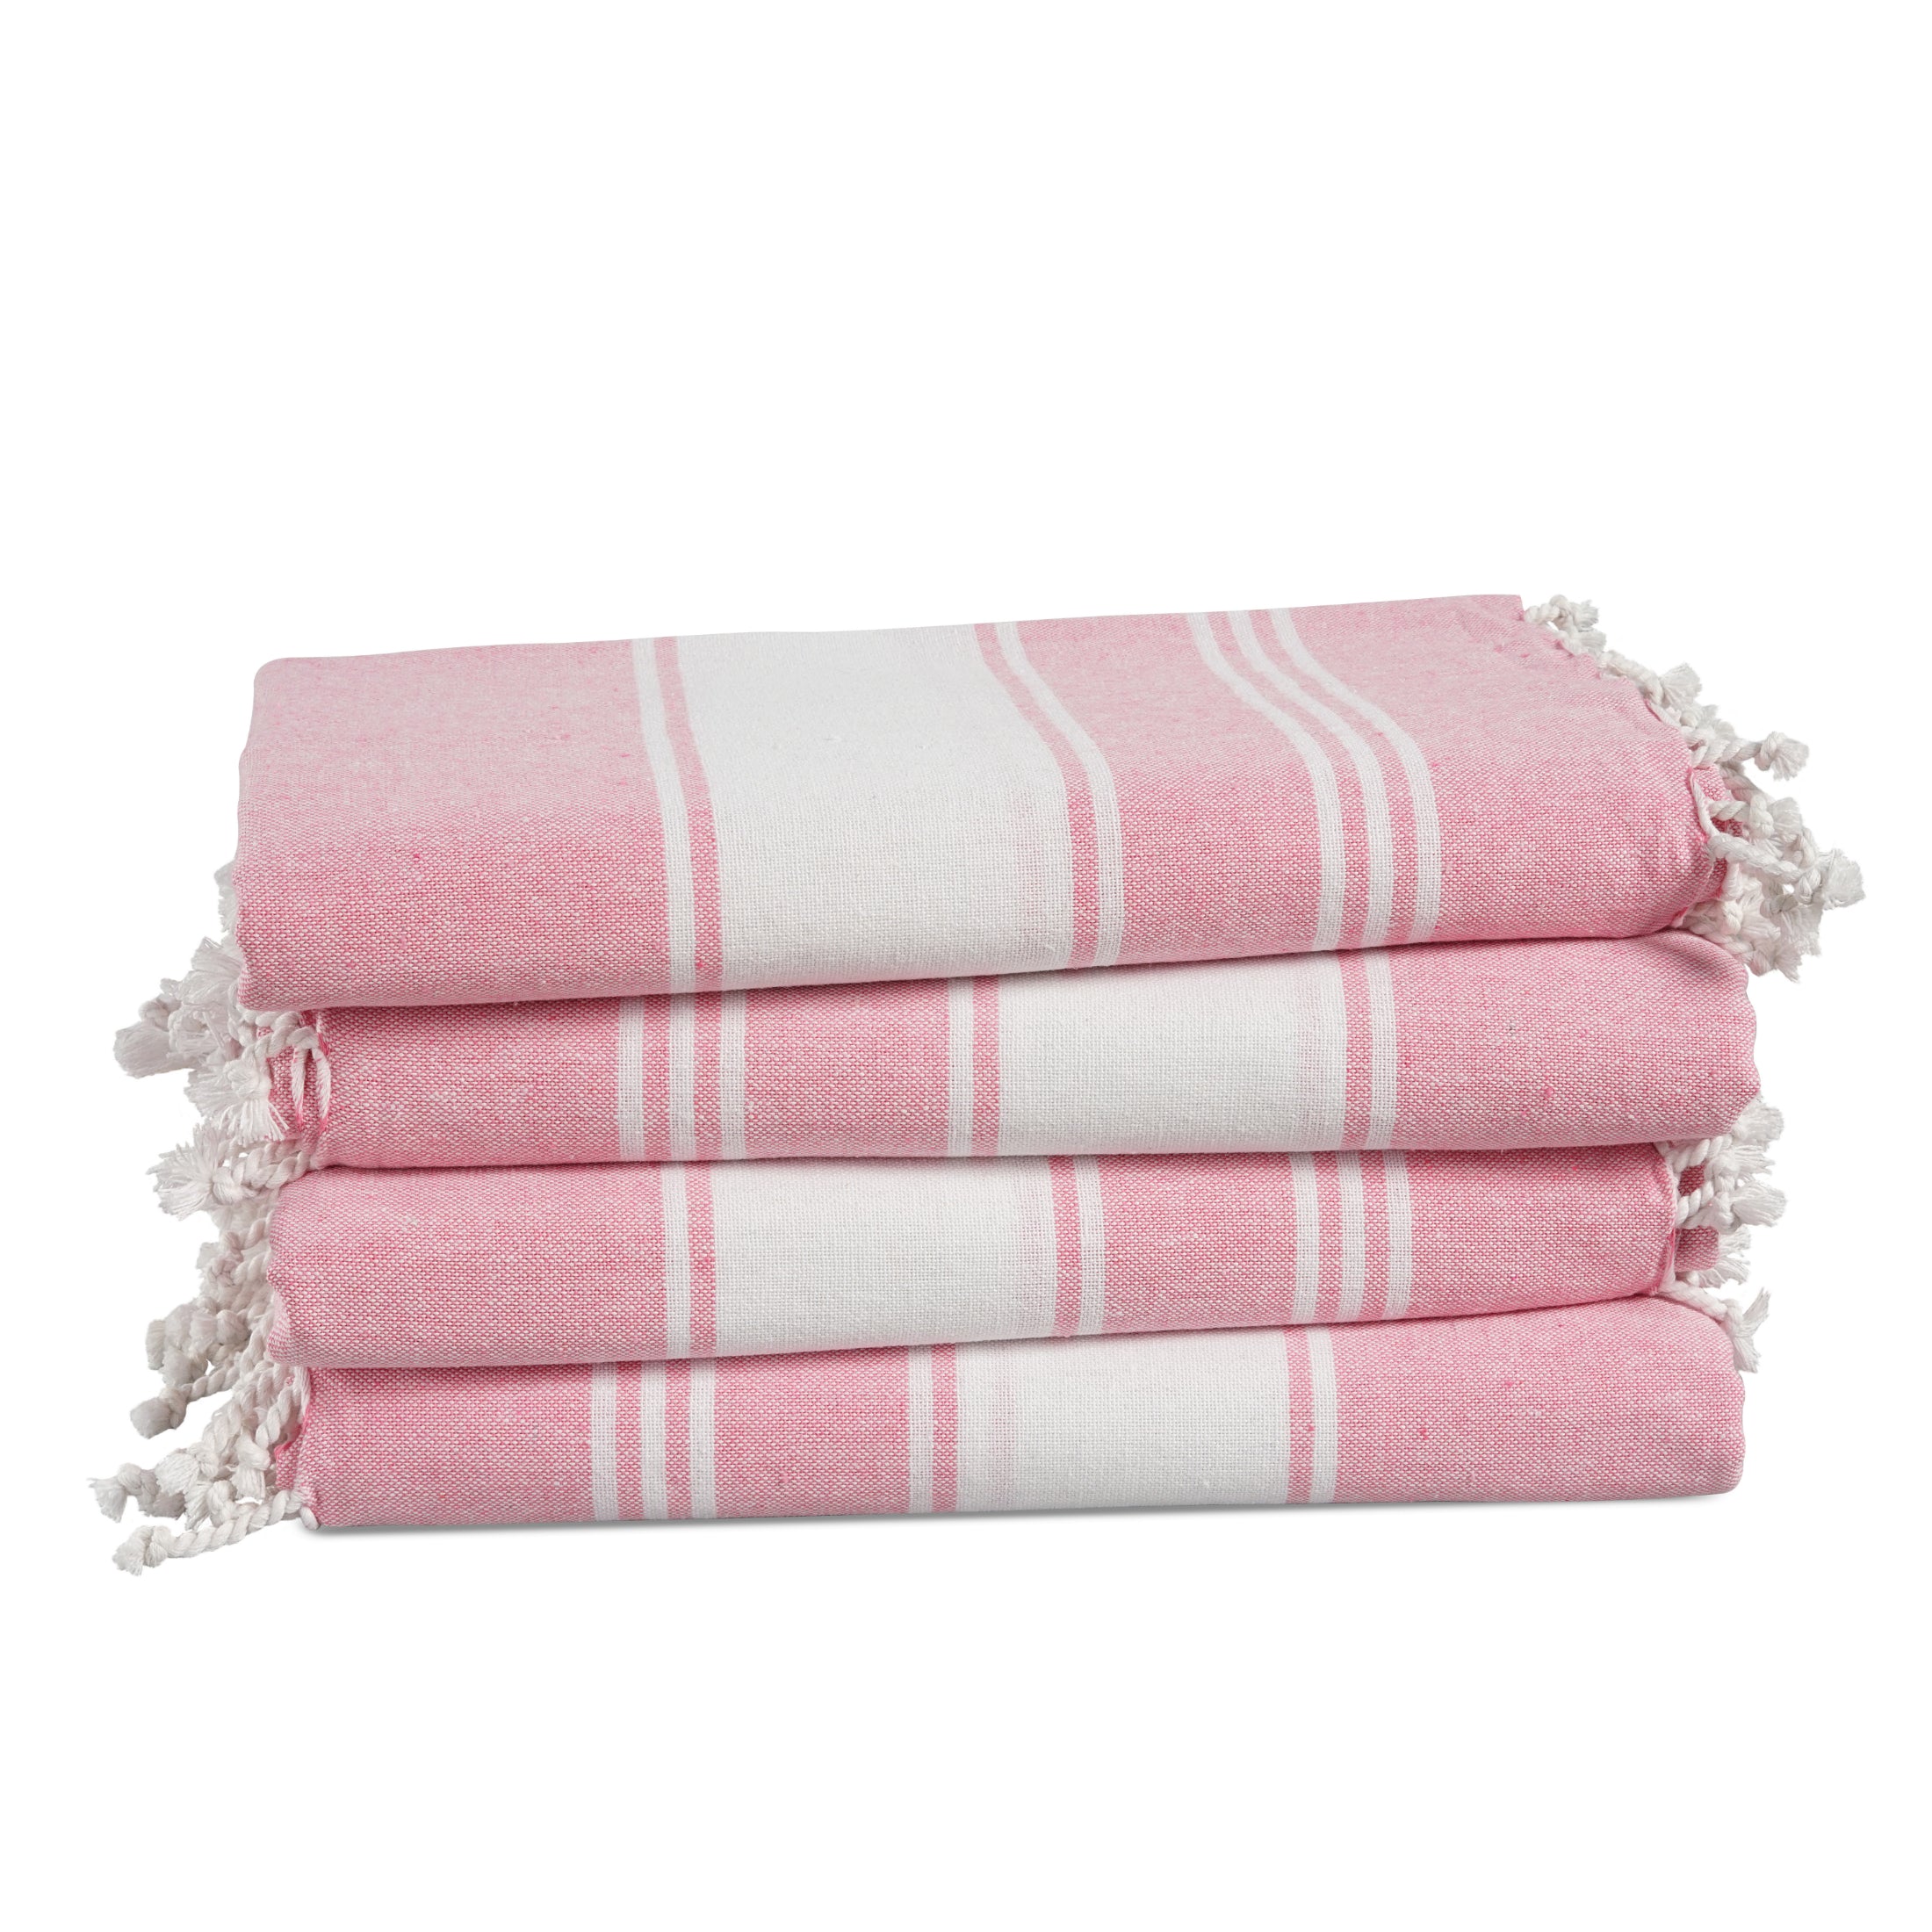 Set of 4 100% Cotton Chambray Turkish Beach Towels - Candy Pink